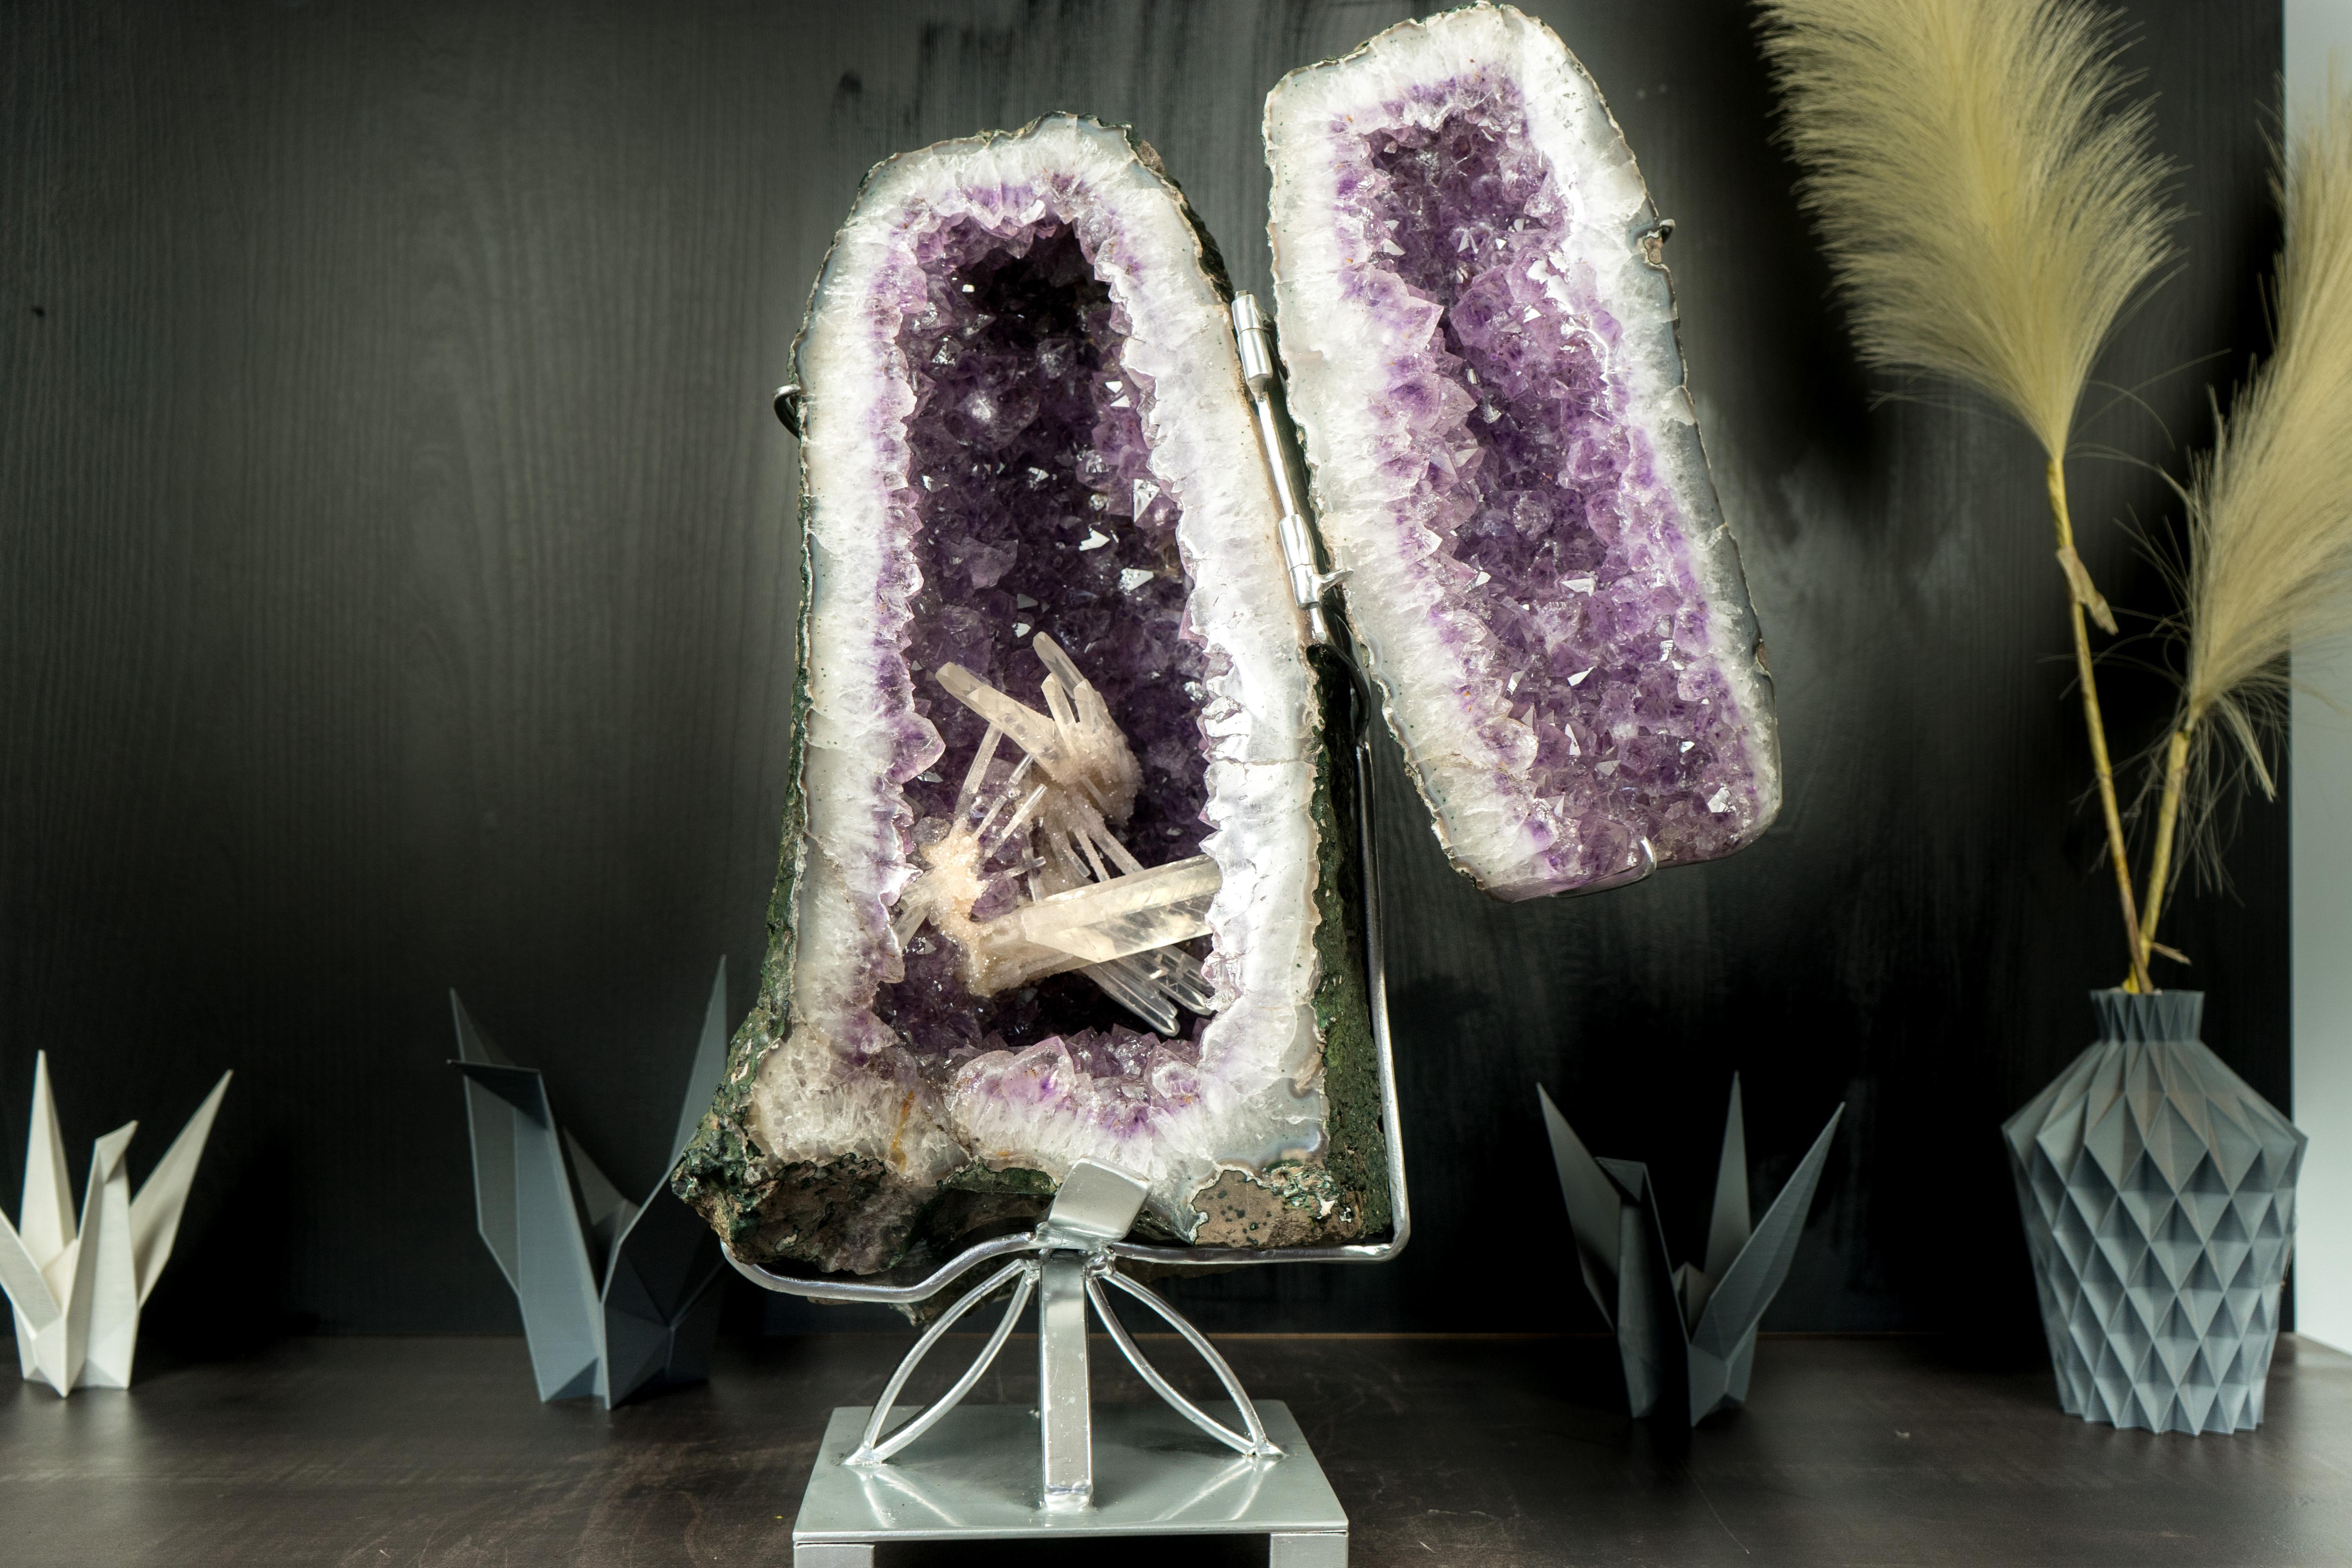 In a world where Amethyst Geodes are quite common, this geode stands out as being far from ordinary. The calcite is gallery-worthy, showing beautiful aesthetics and an intact nature. This specimen stands out and will become the celebrated piece in